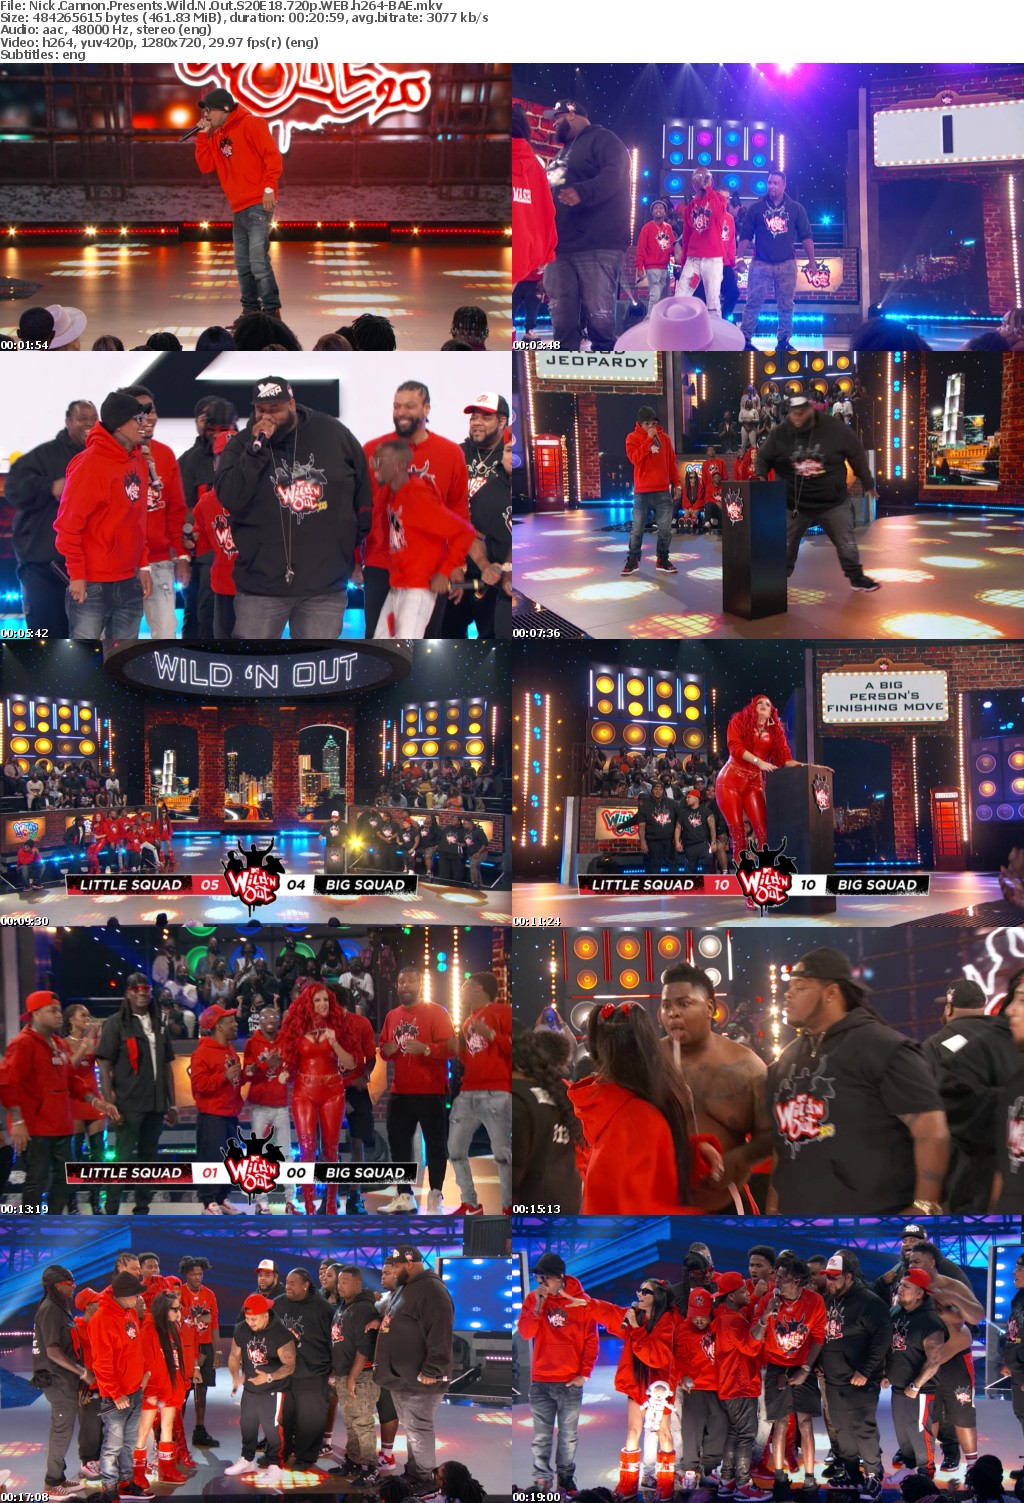 Nick Cannon Presents Wild N Out S20E18 720p WEB h264-BAE